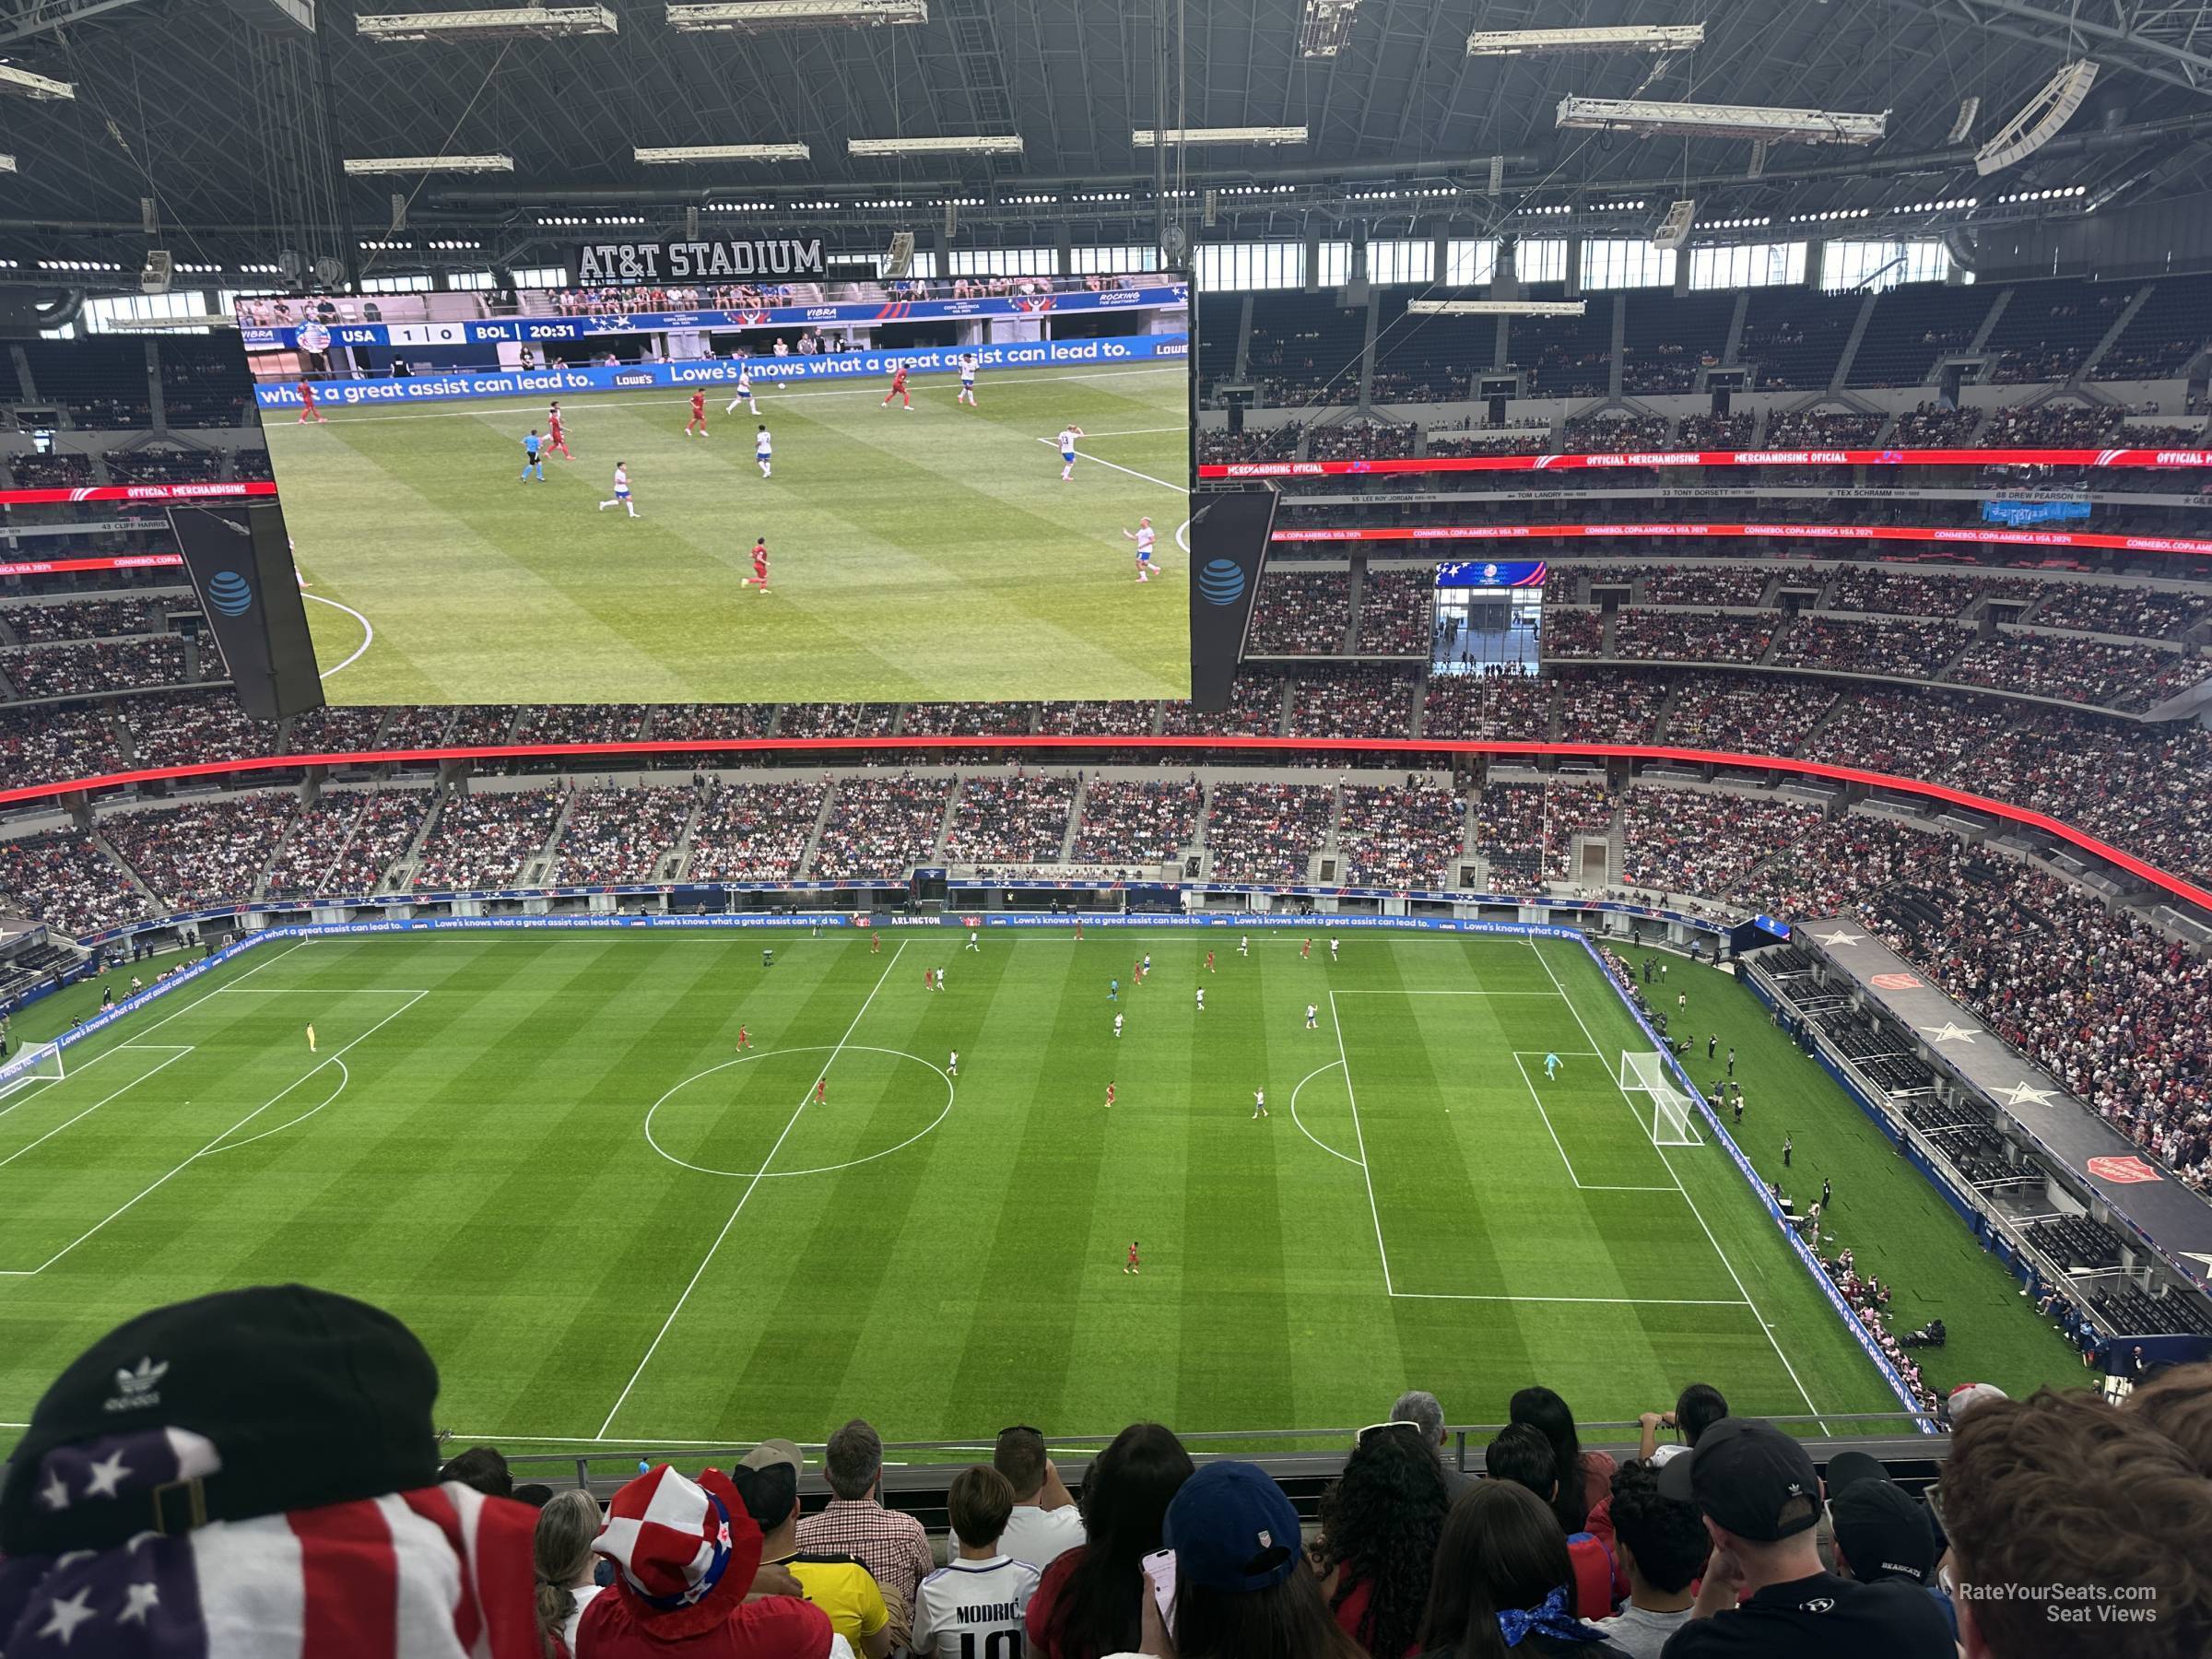 section 441, row 6 seat view  for soccer - at&t stadium (cowboys stadium)